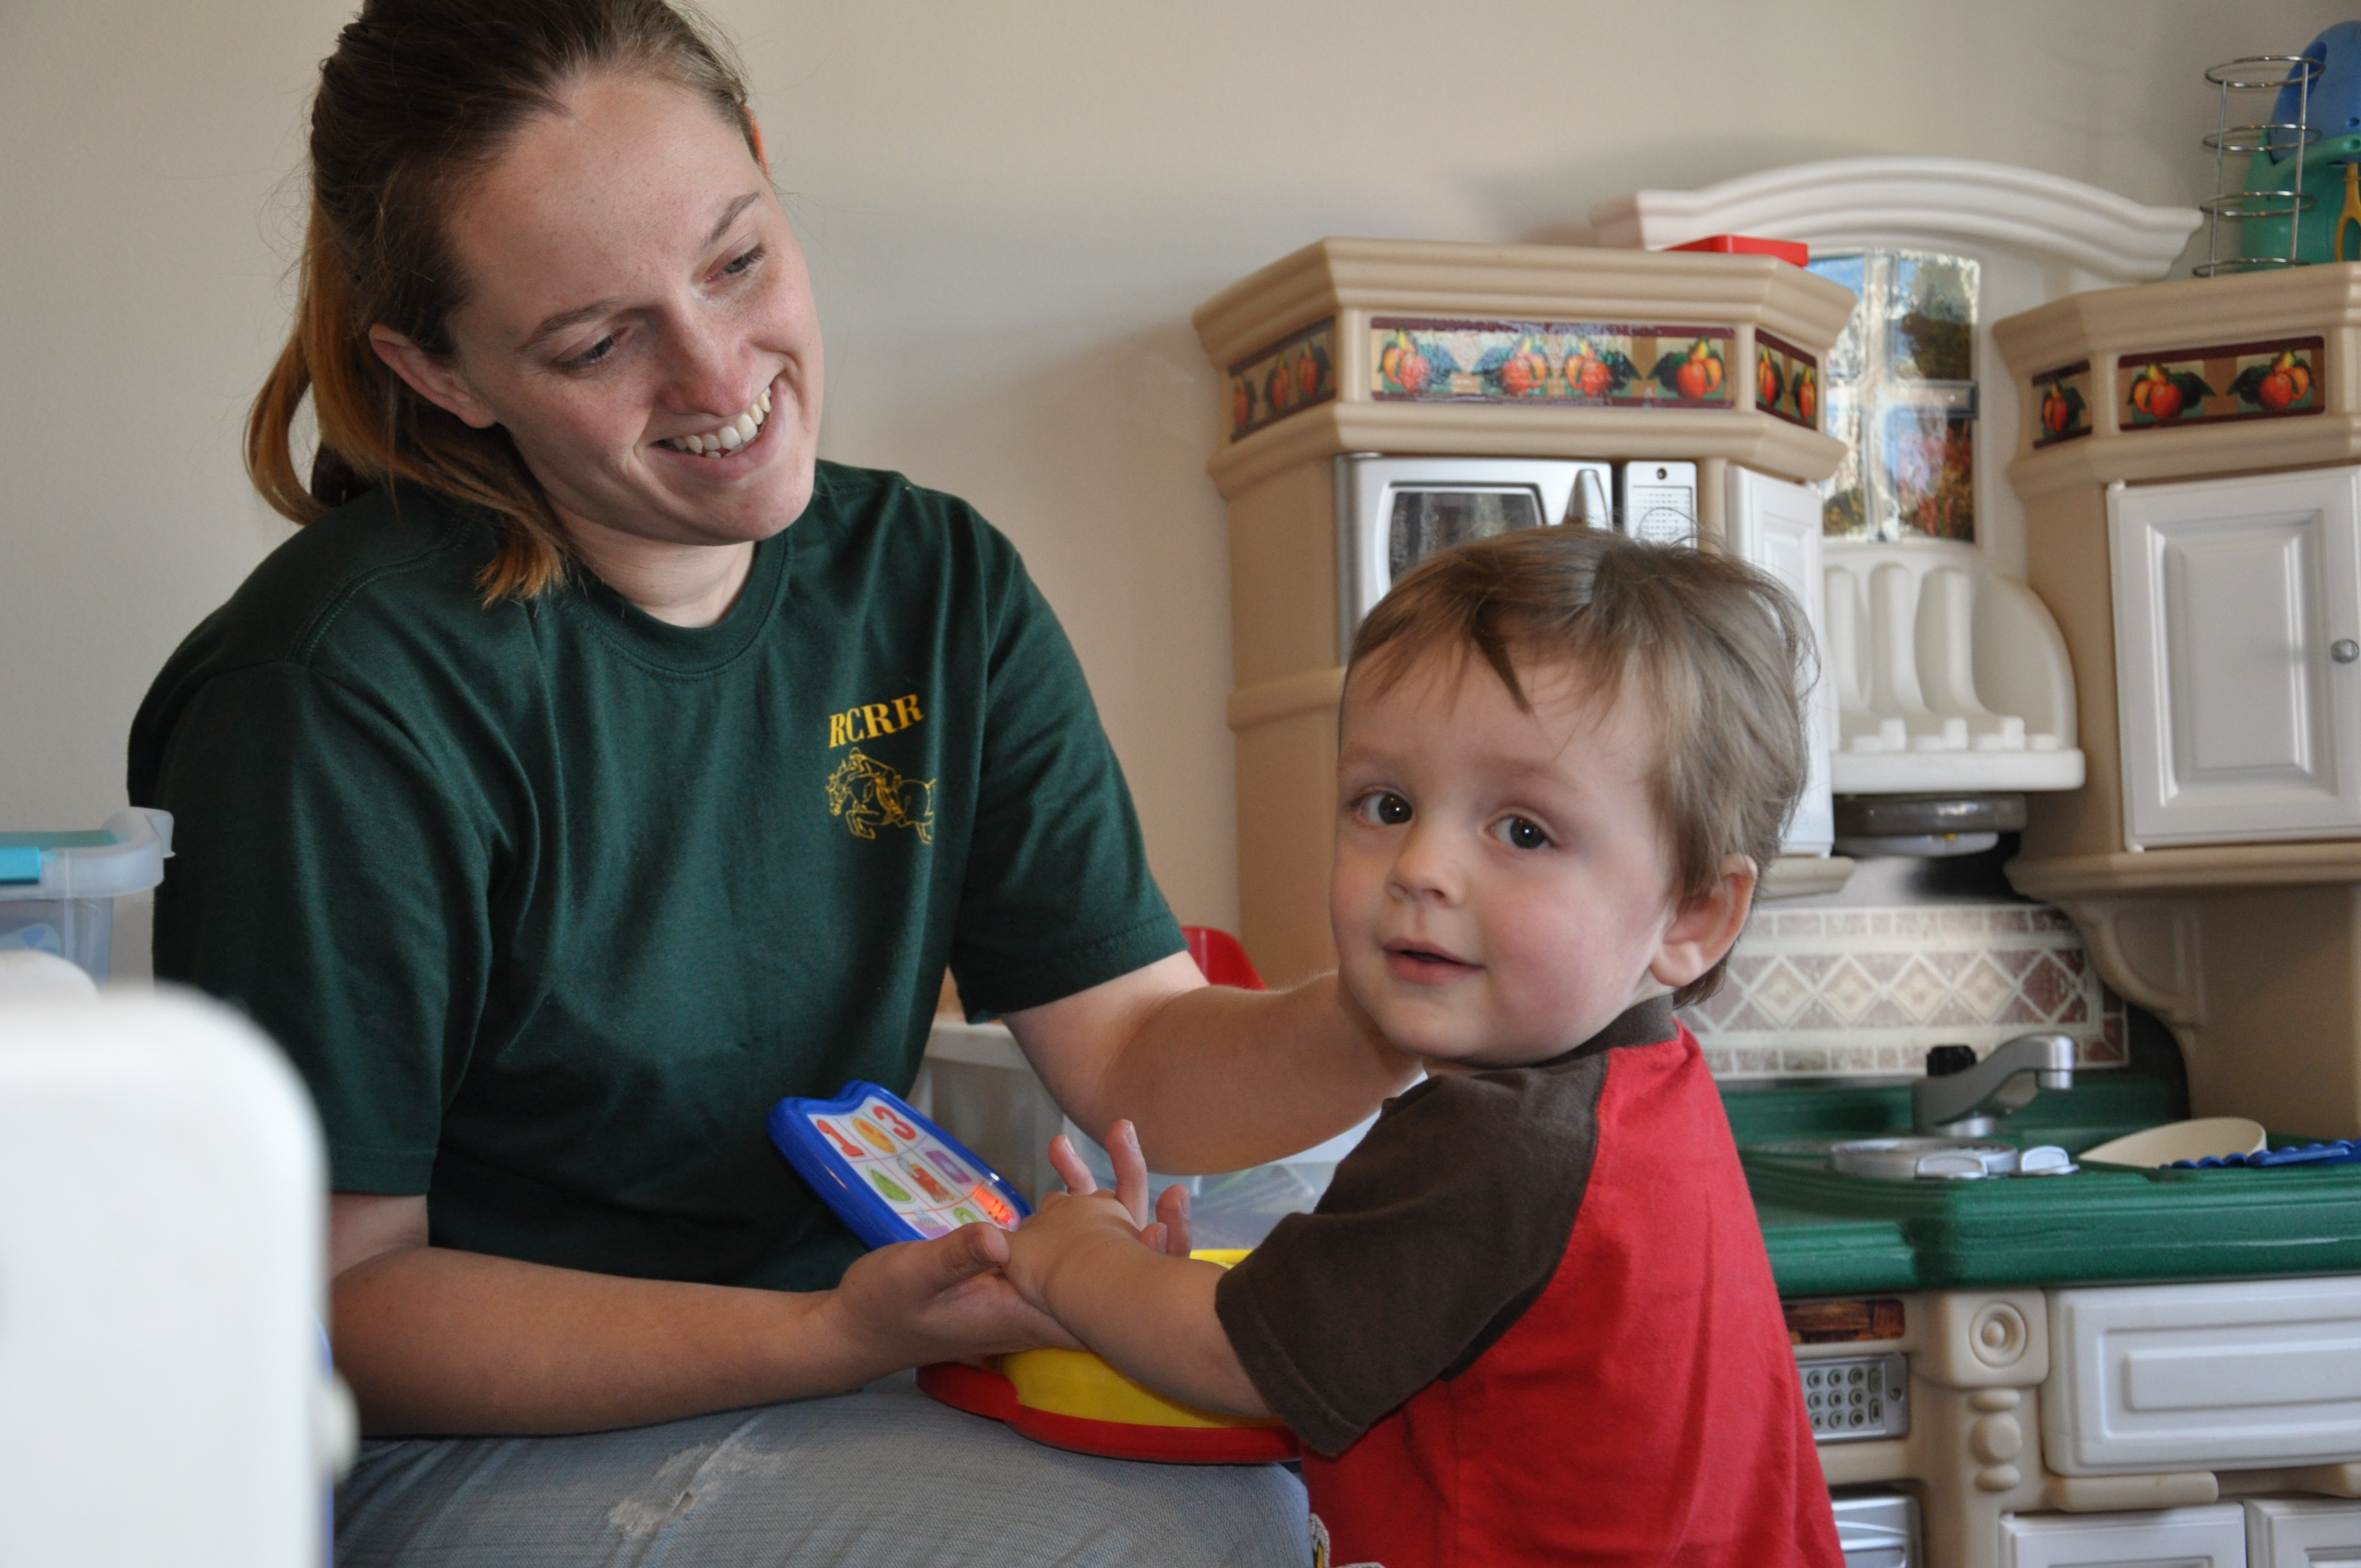 Daycare Provider Deductions That You Don’t Want to Miss